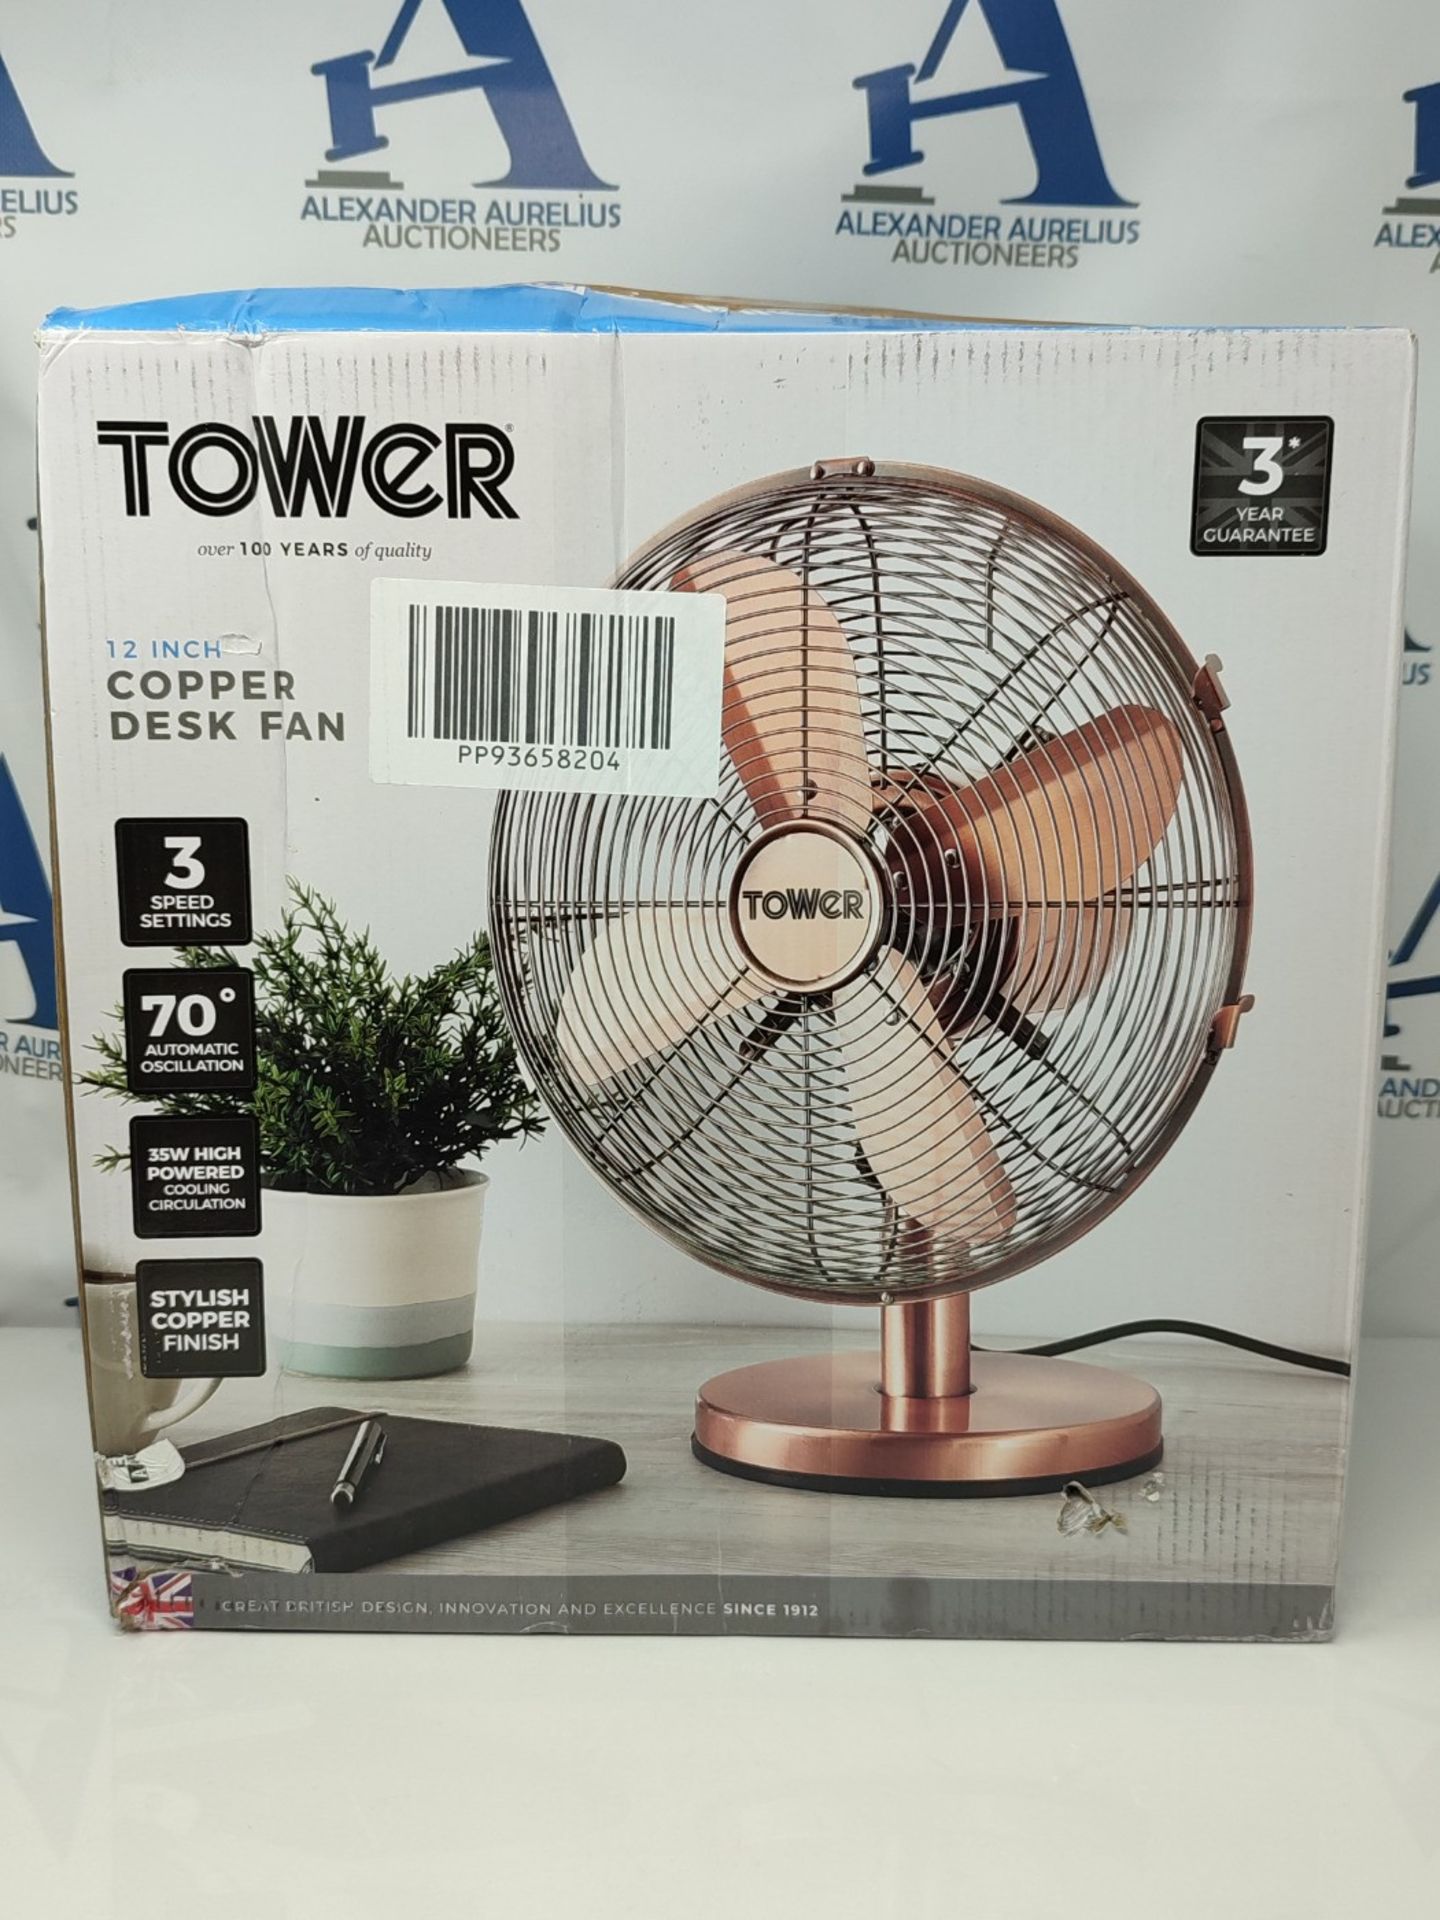 Tower T605000C Metal Desk Fan with 3 Speeds, Automatic Oscillation, 12 , 35W, Copper - Image 2 of 3